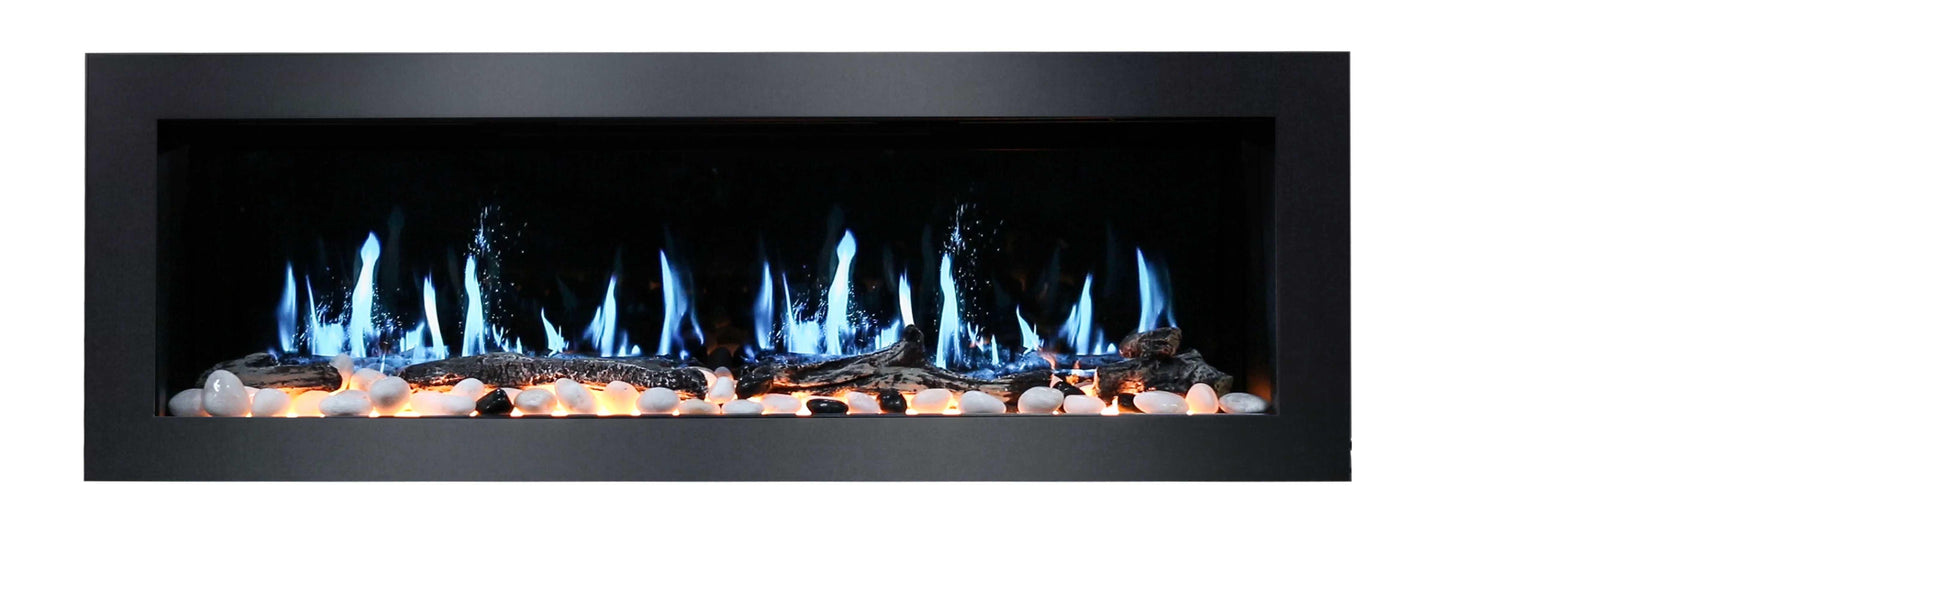 ZopaFlame™ 58" Linear Wall-mount Electric Fireplace - BP19588V - ZopaFlame Fireplaces